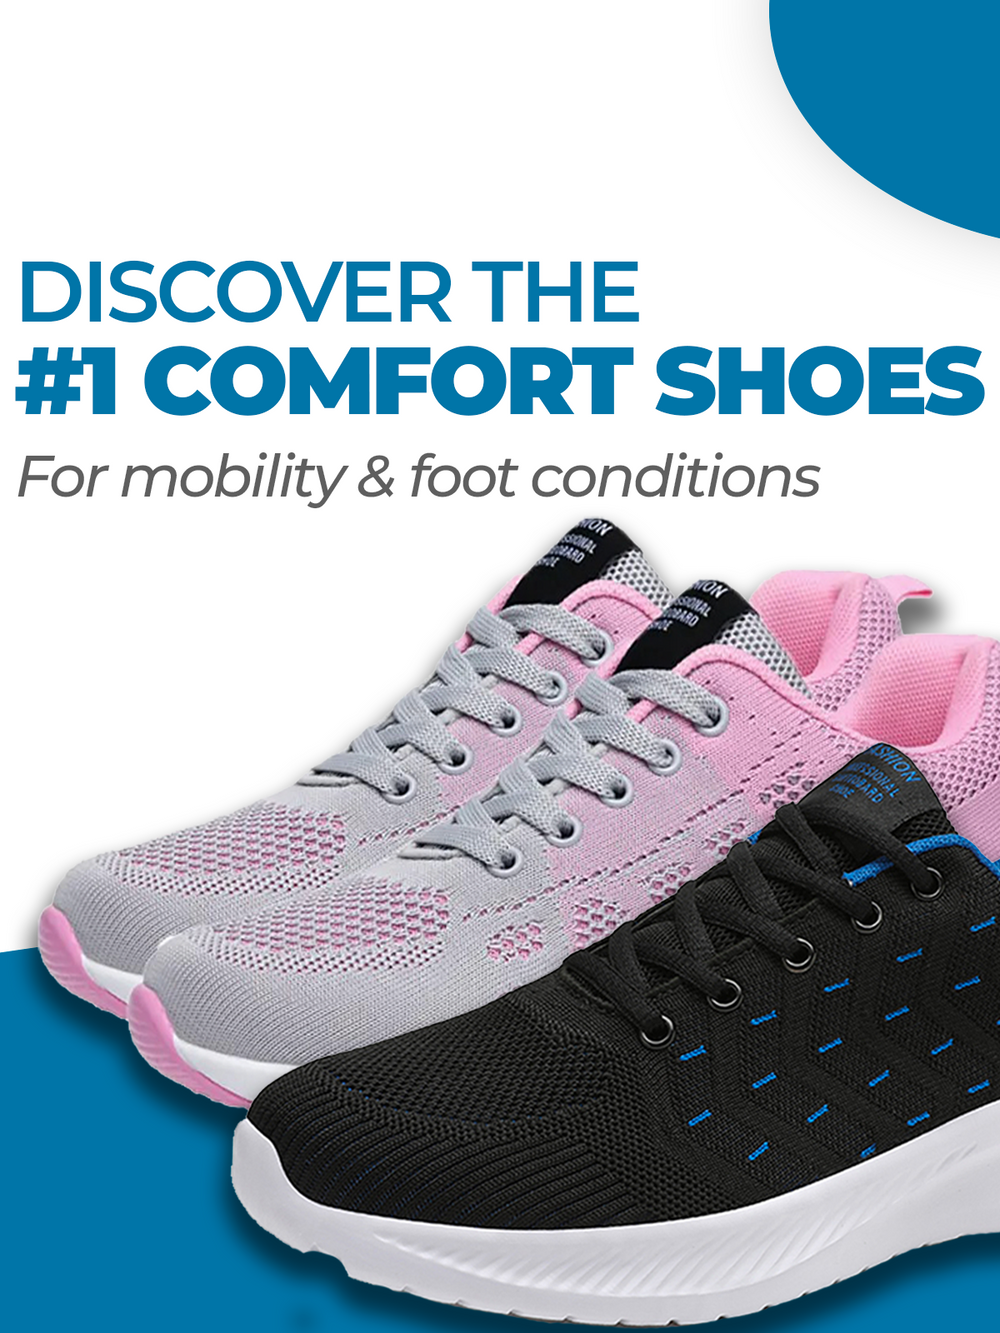 Musabela | The Most Comfortable Orthopedic Shoes | Official Website